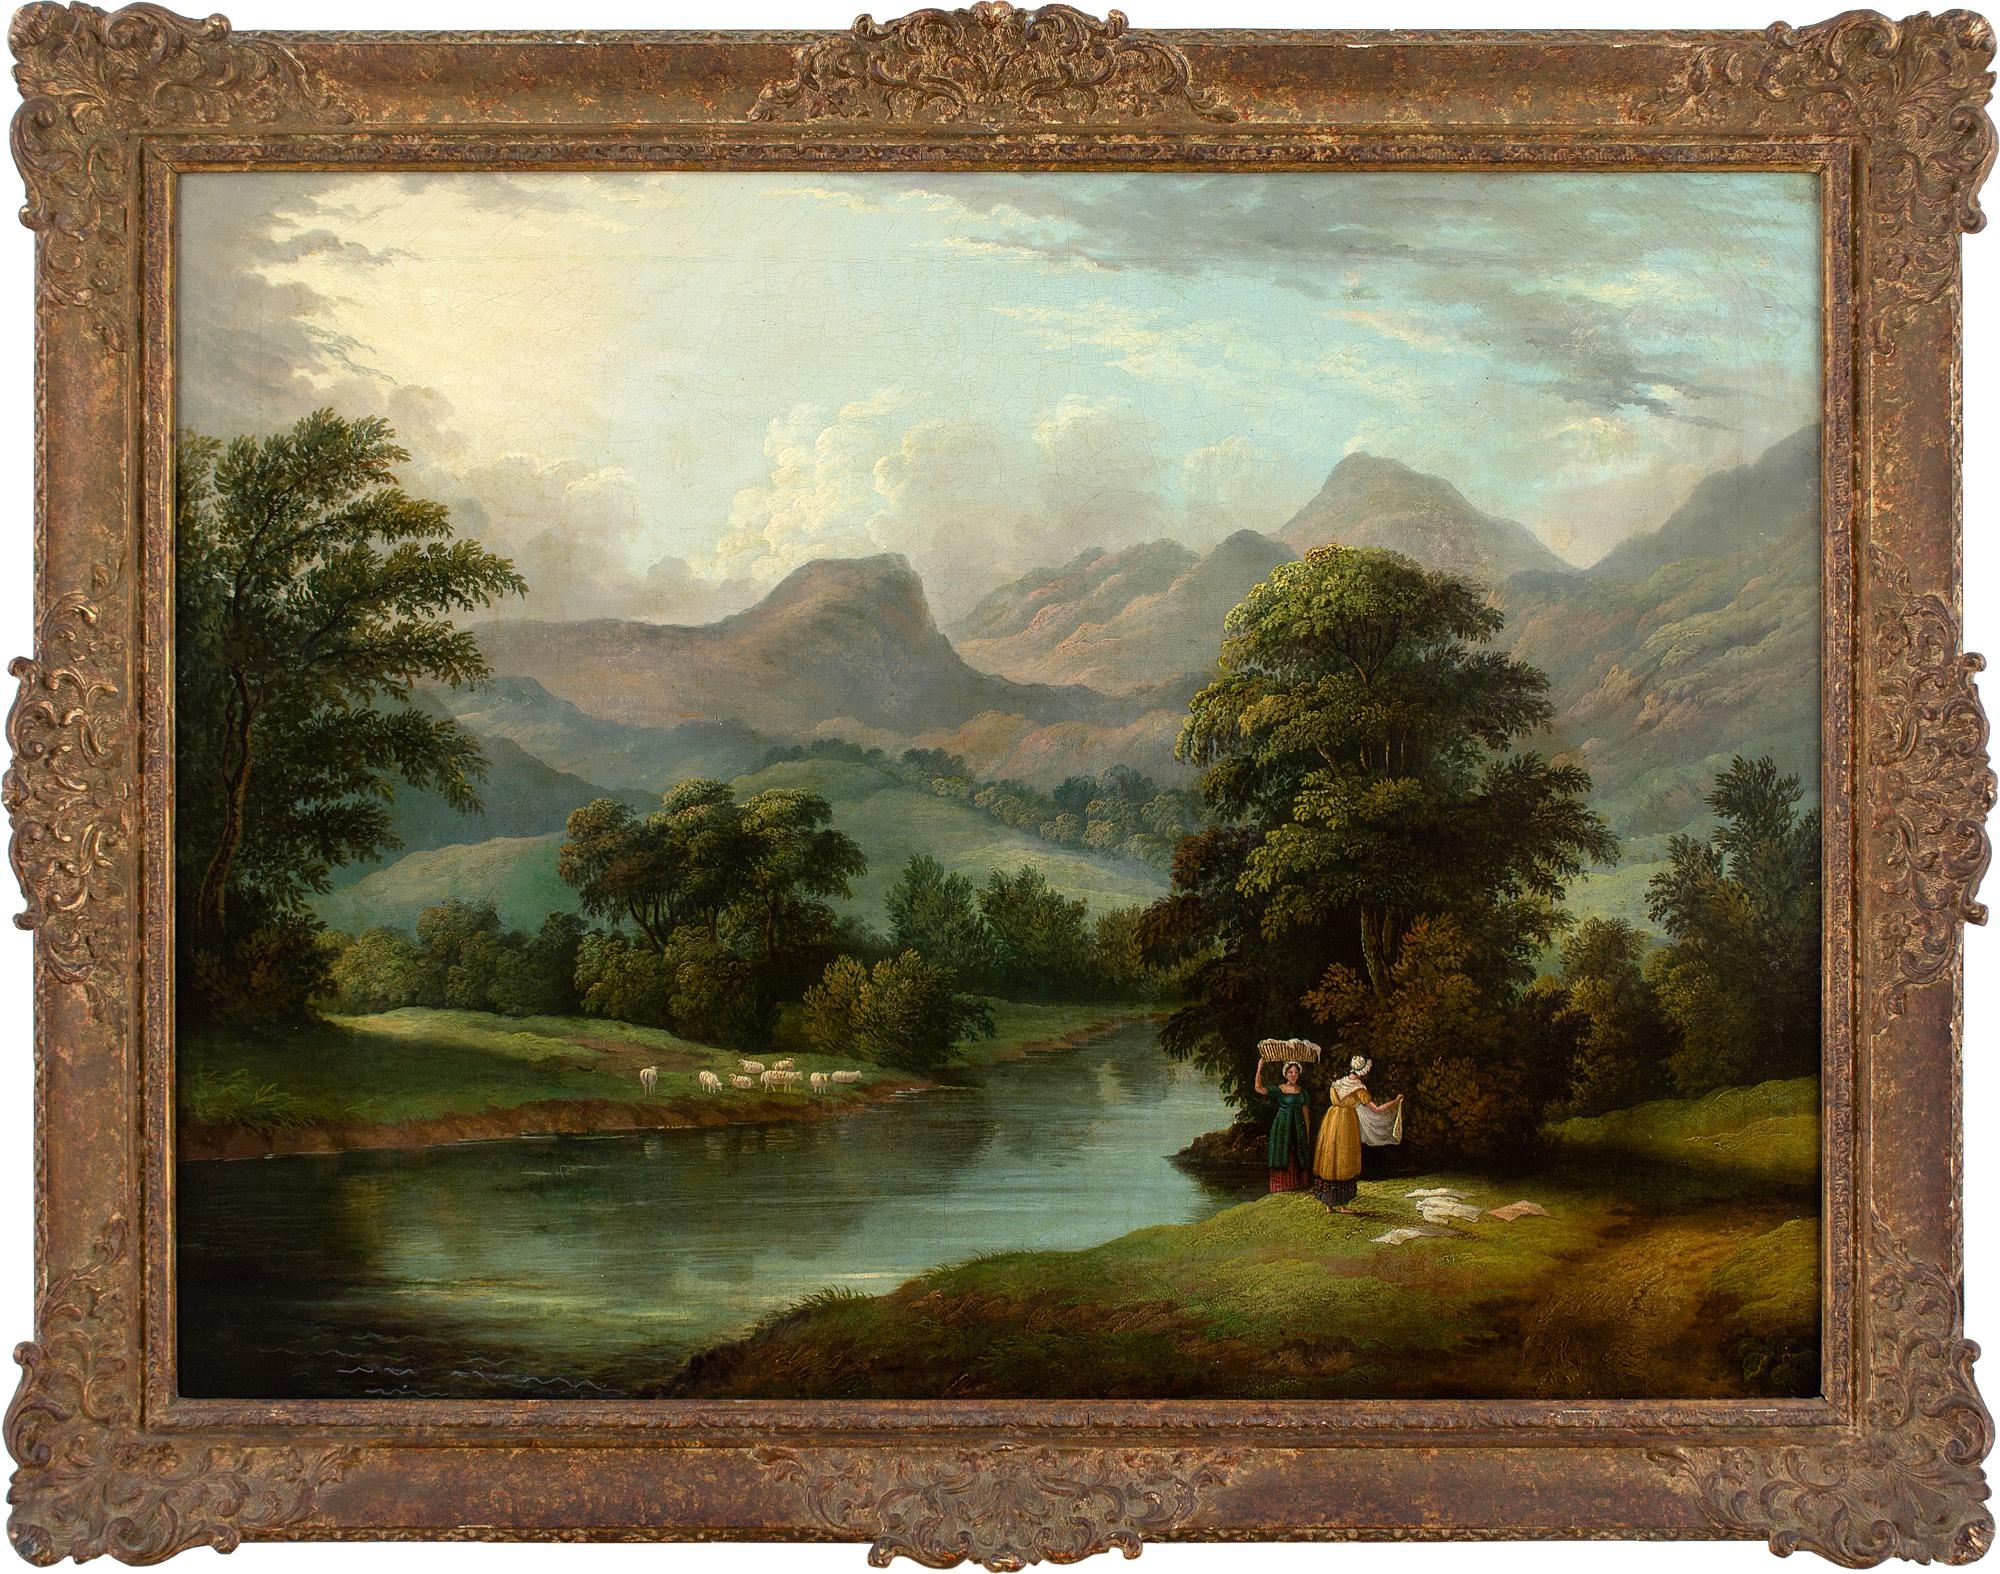 Unknown Figurative Painting - Early 19th-Century British School, River Landscape With Women Washing Laundry